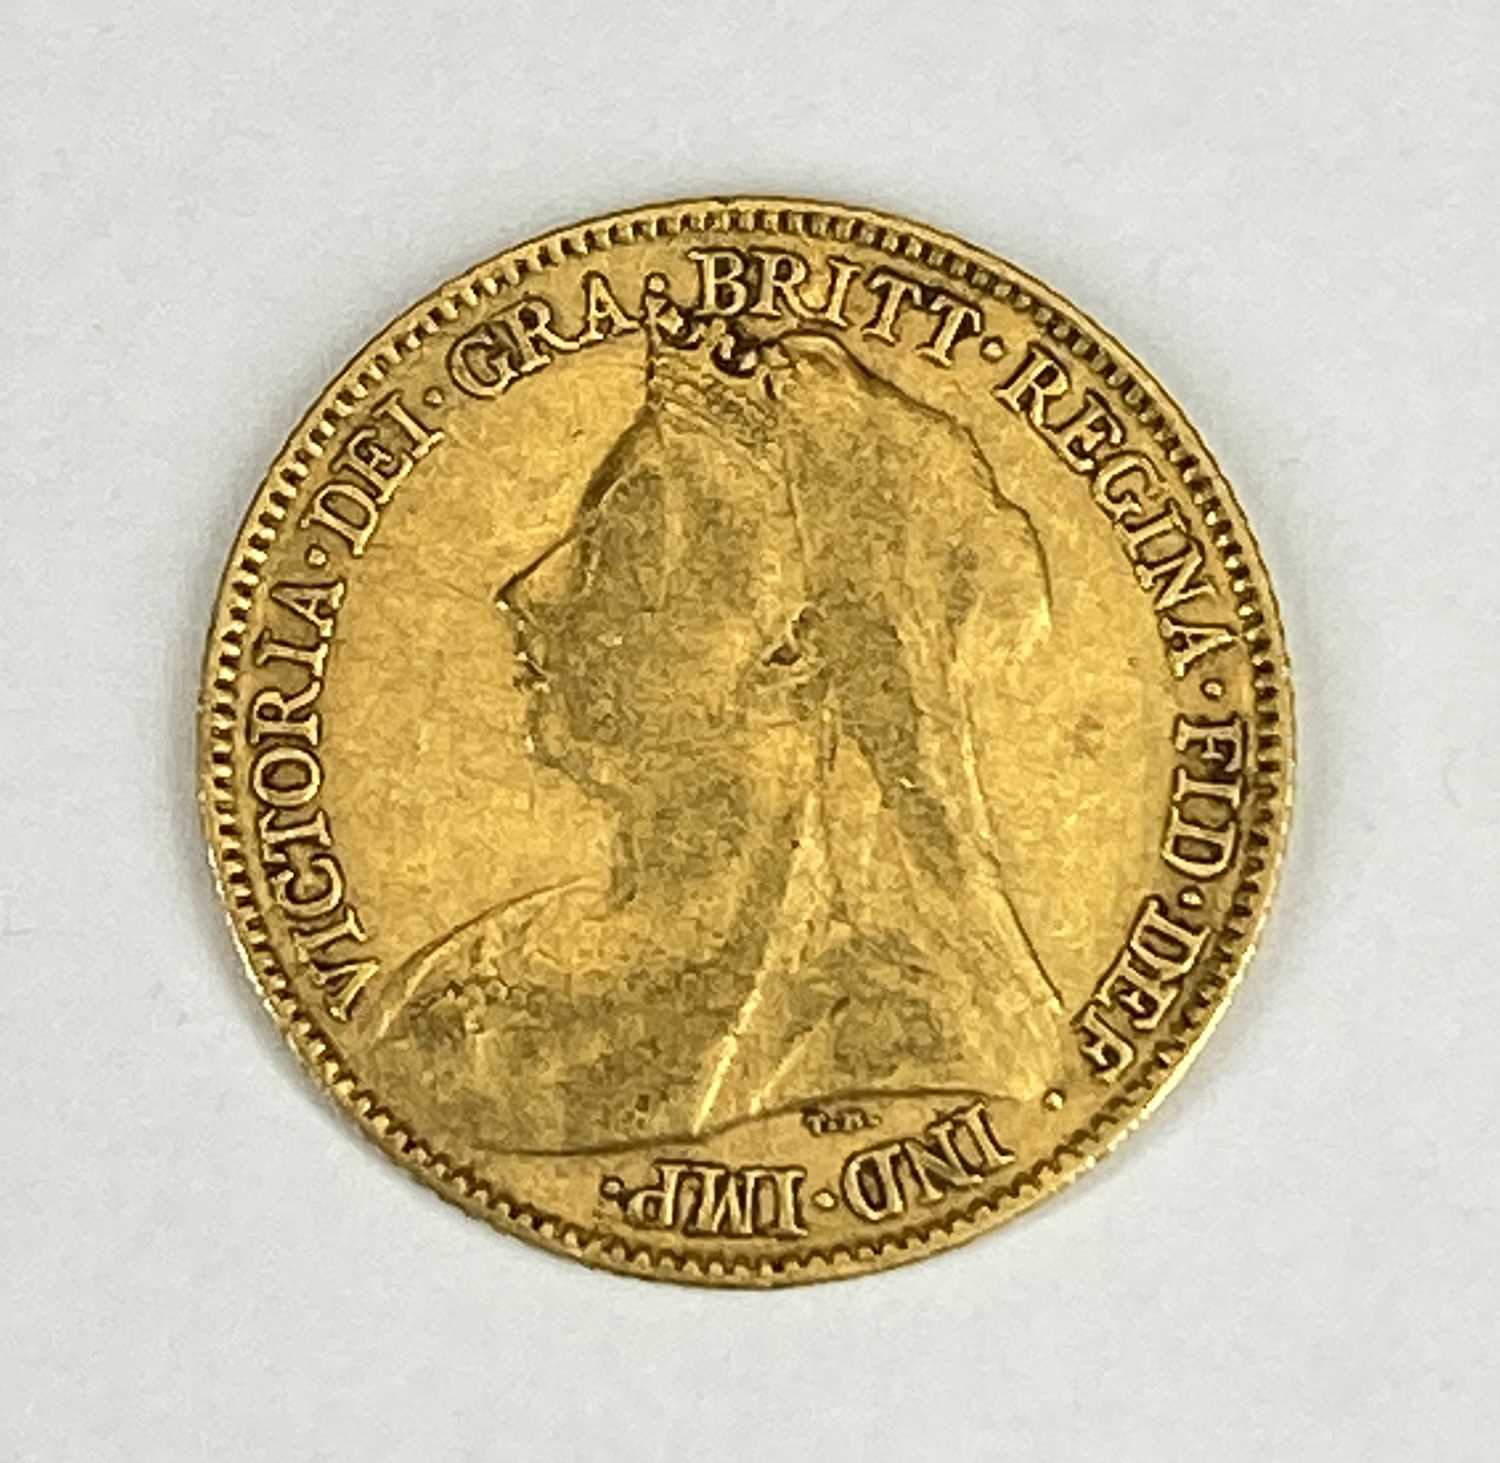 QUEEN VICTORIA VEILED HEAD GOLD HALF SOVEREIGN, 1896, 4g Provenance: private collection Gwynedd - Image 2 of 2